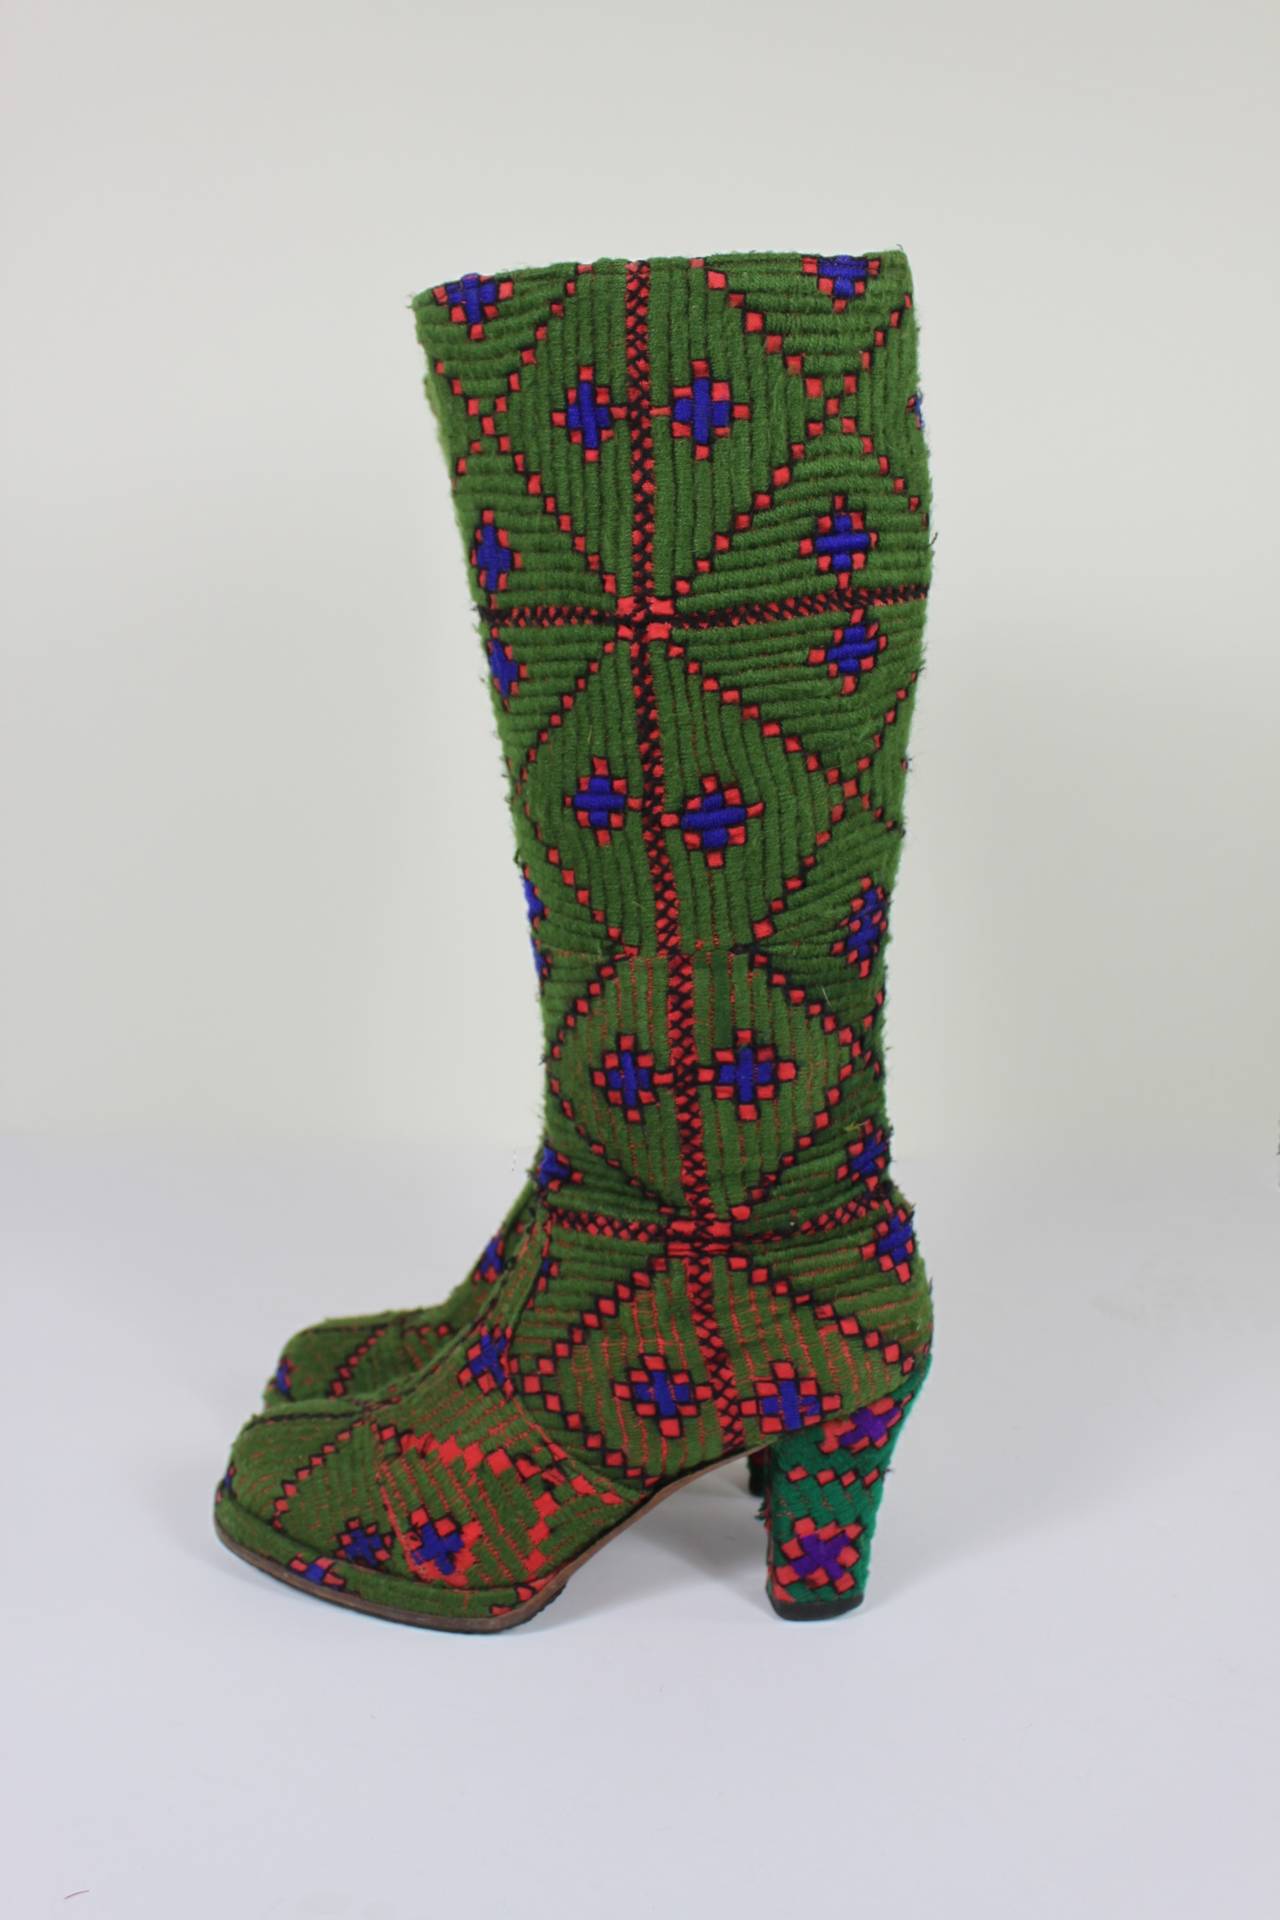 Fabulous, vibrant 1960s platform boots. Done in the style of hand embroidery, they feature a green, cobalt blue, and red geometric pattern. The heel is done in contrasting aqua-green thread. 

These would best suit a US size 6.
-Side